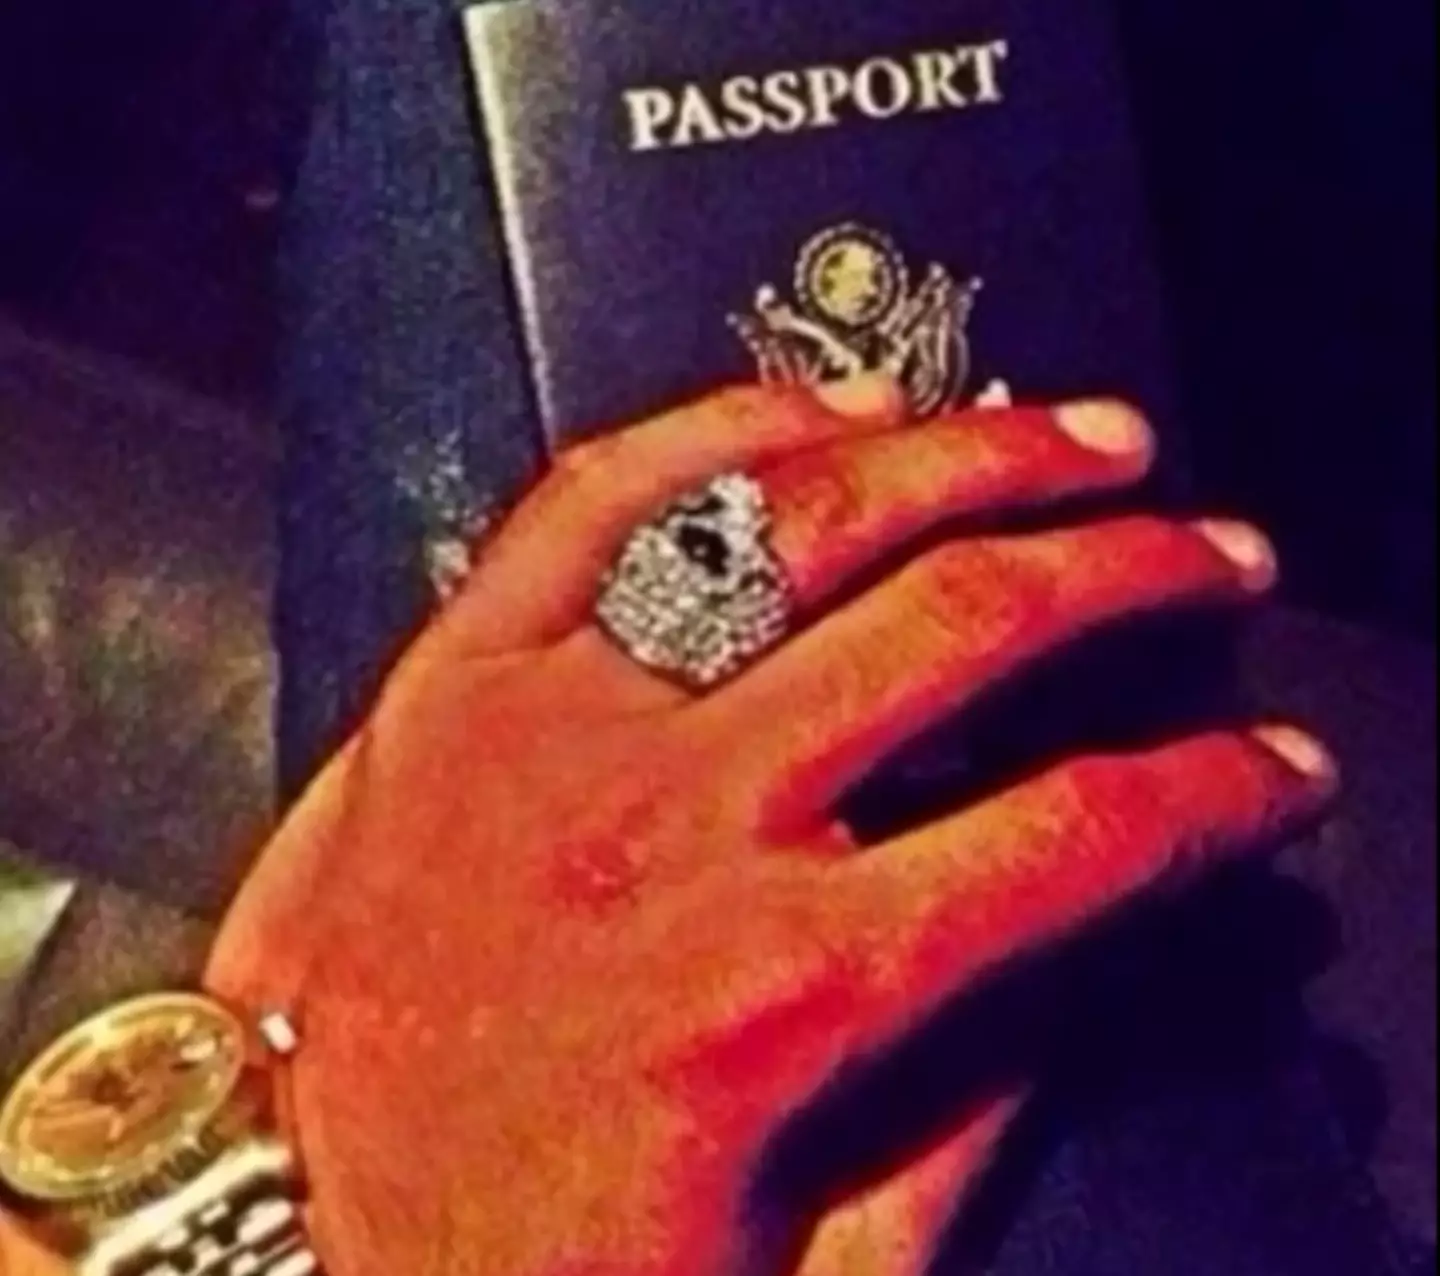 The cartel hitman posted his wealthy lifestyle on Instagram.